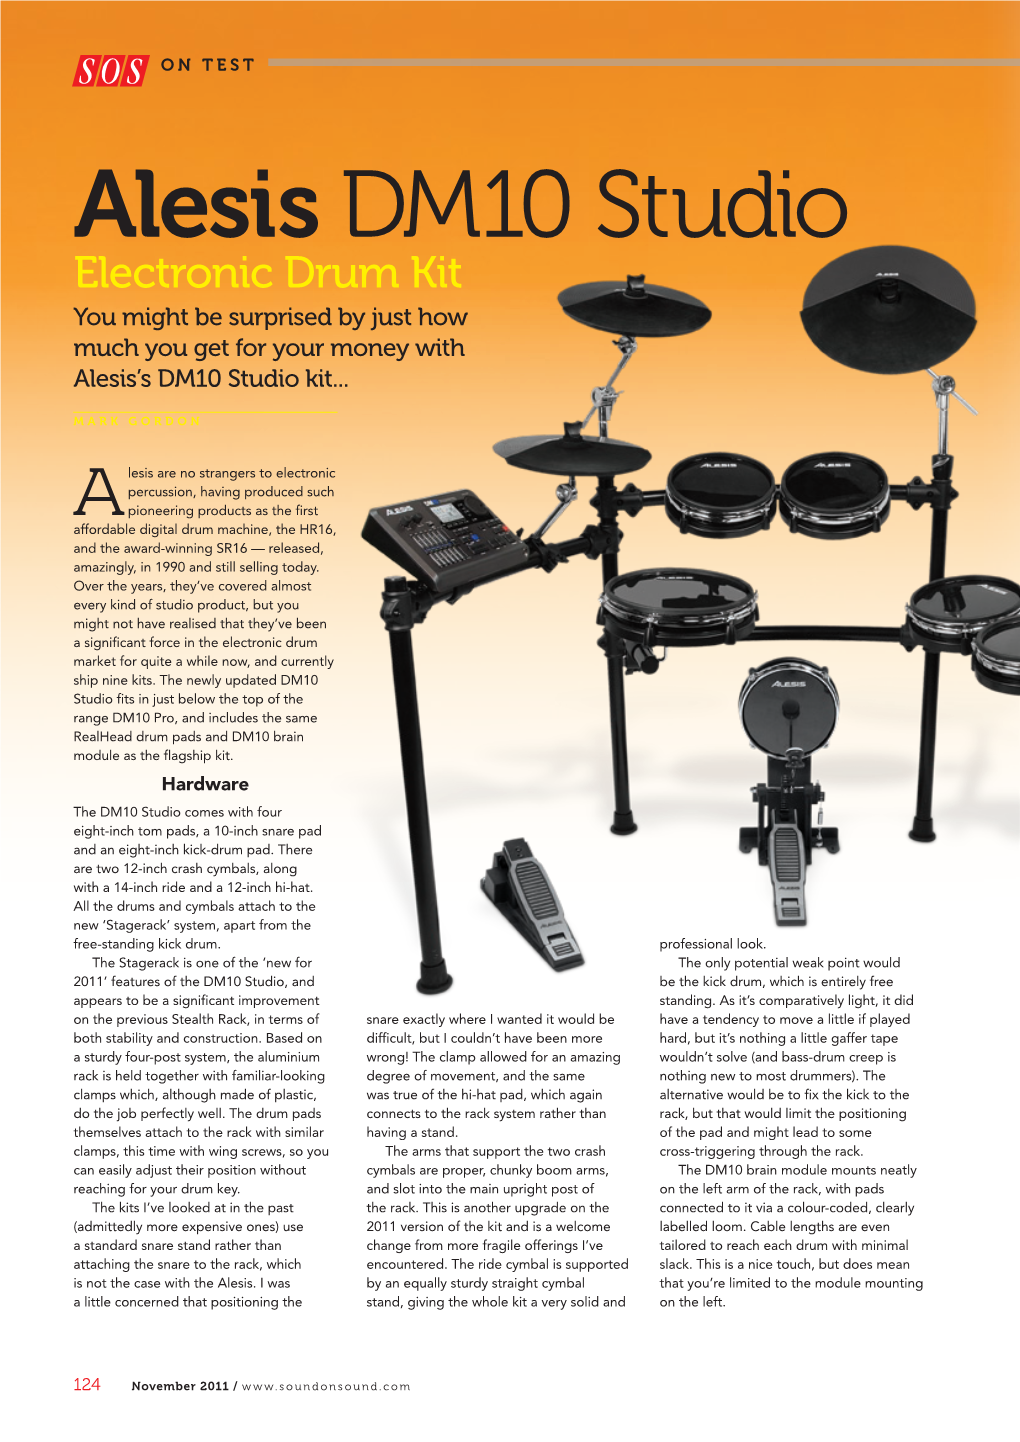 Alesis DM10 Studio Electronic Drum Kit You Might Be Surprised by Just How Much You Get for Your Money with Alesis’S DM10 Studio Kit